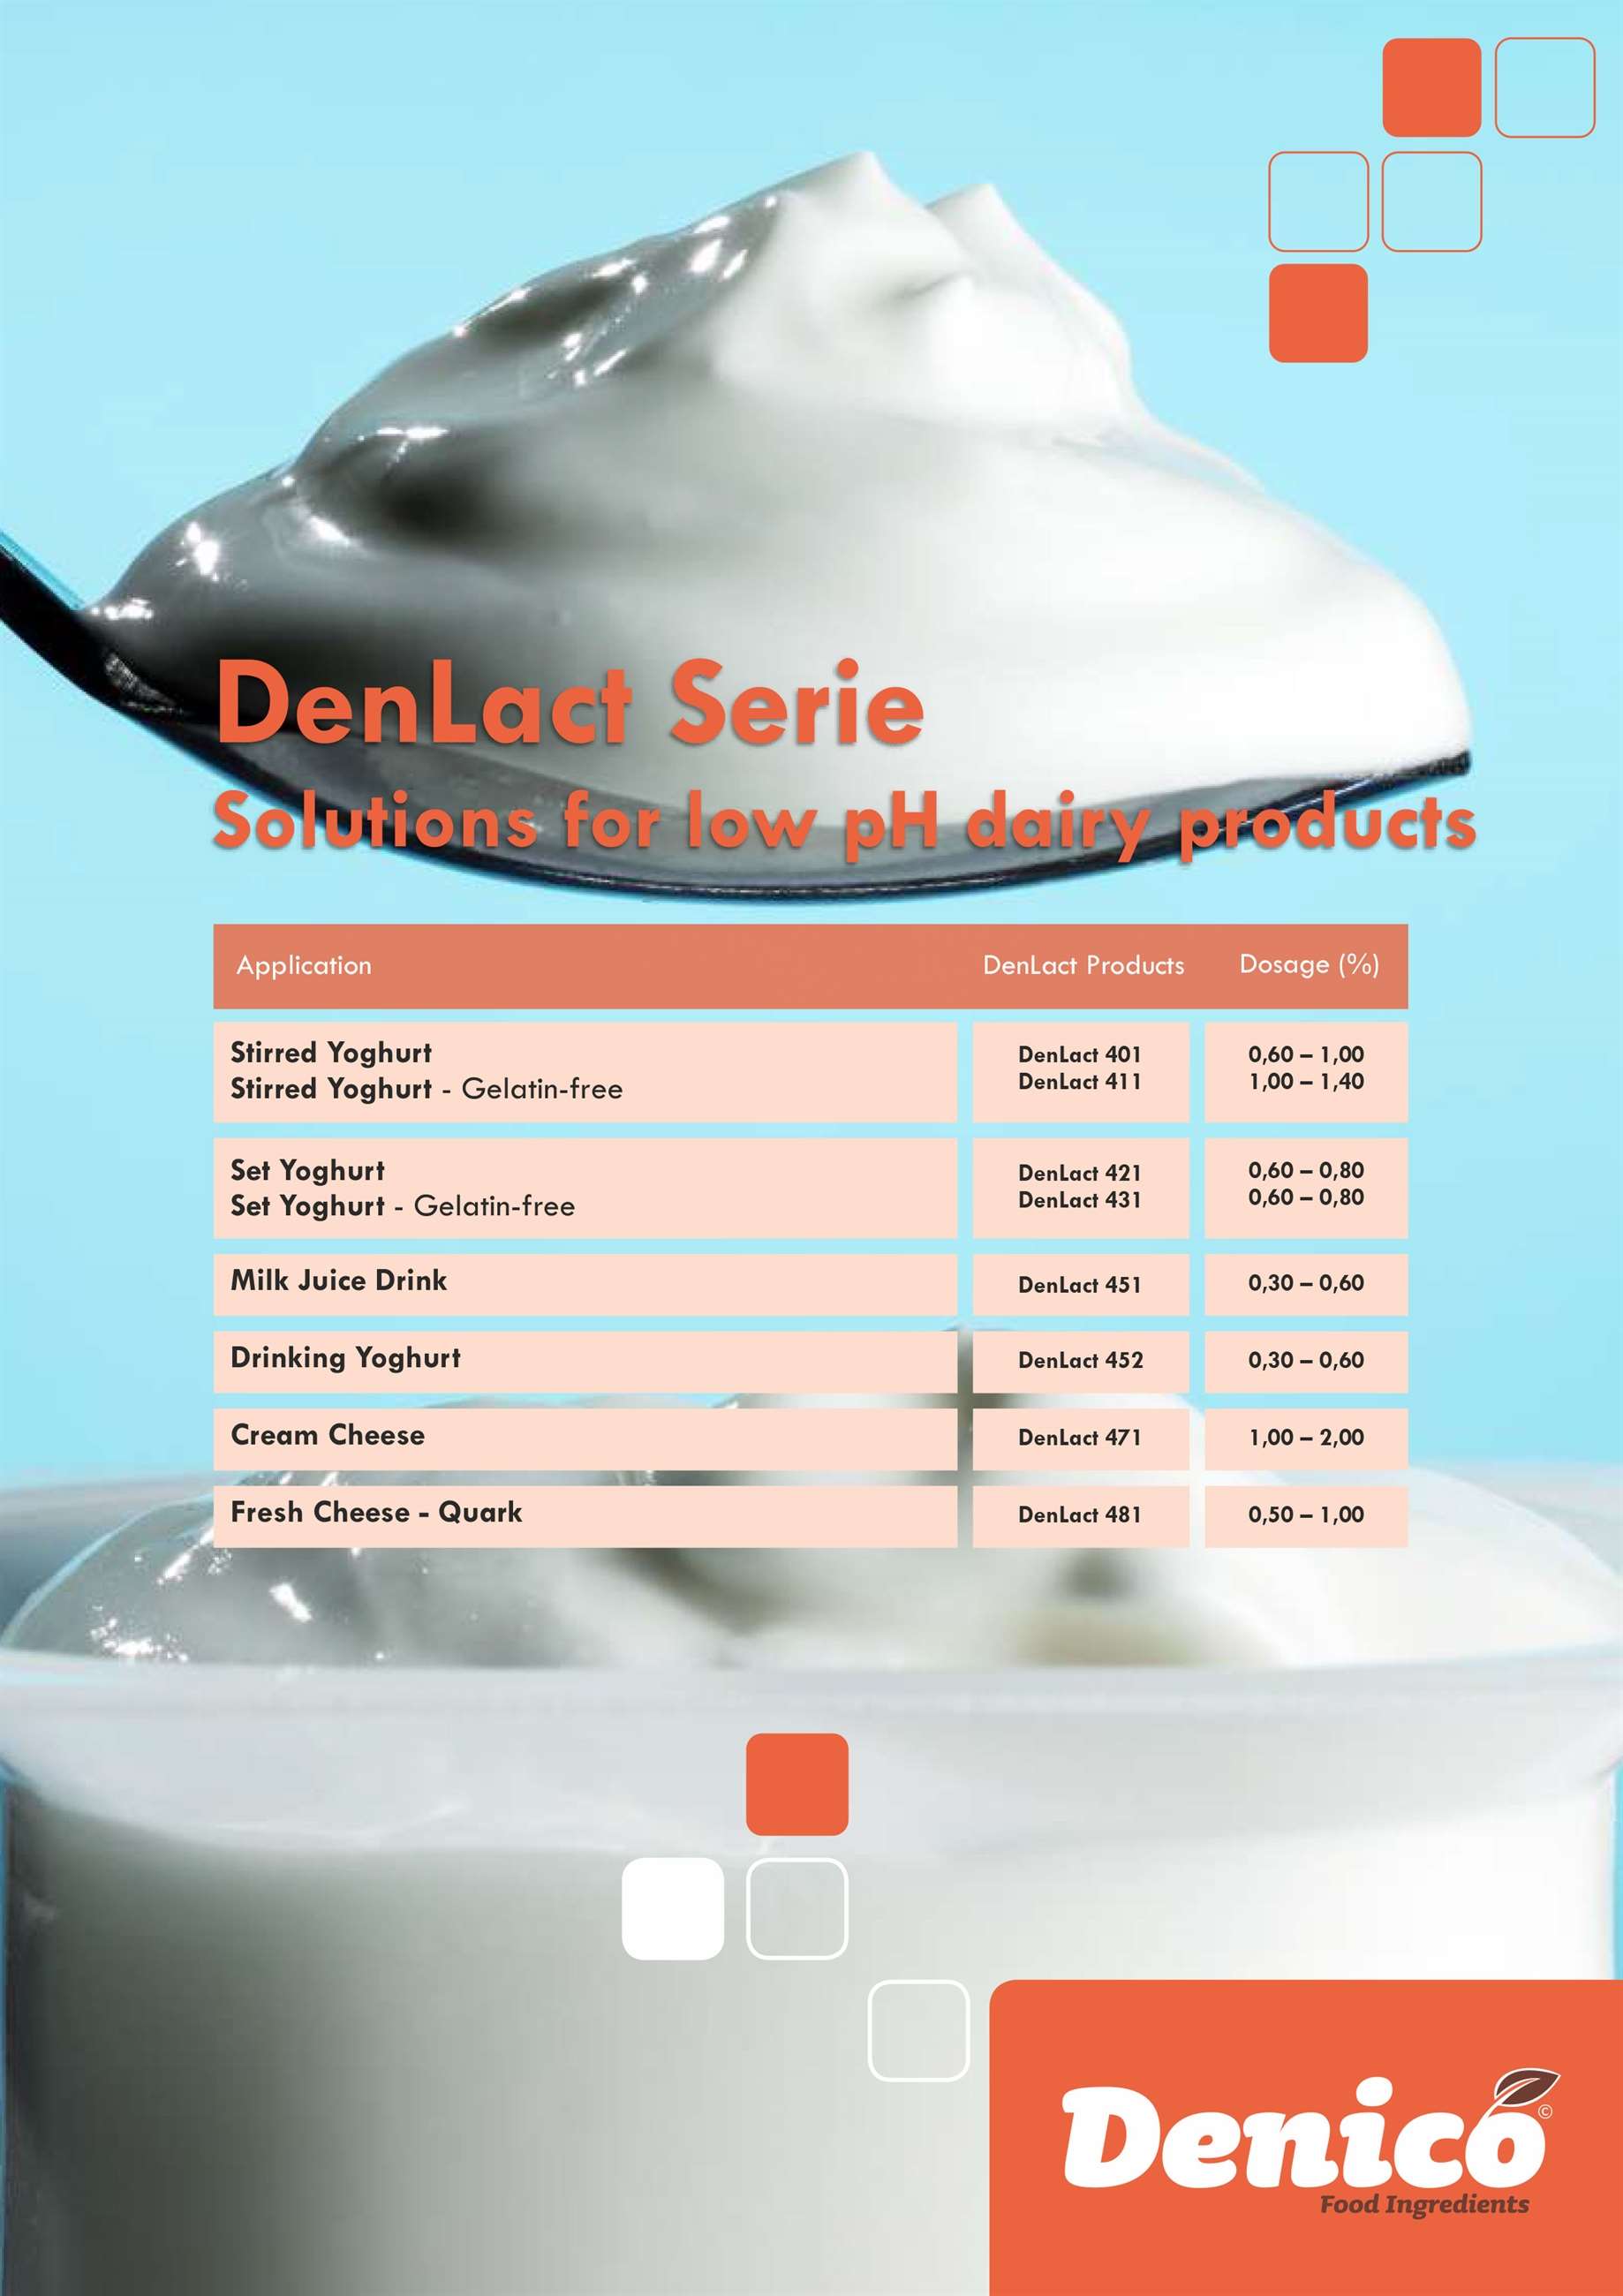 denlact---solutions-for-low-ph-dairy-products-ver01-1